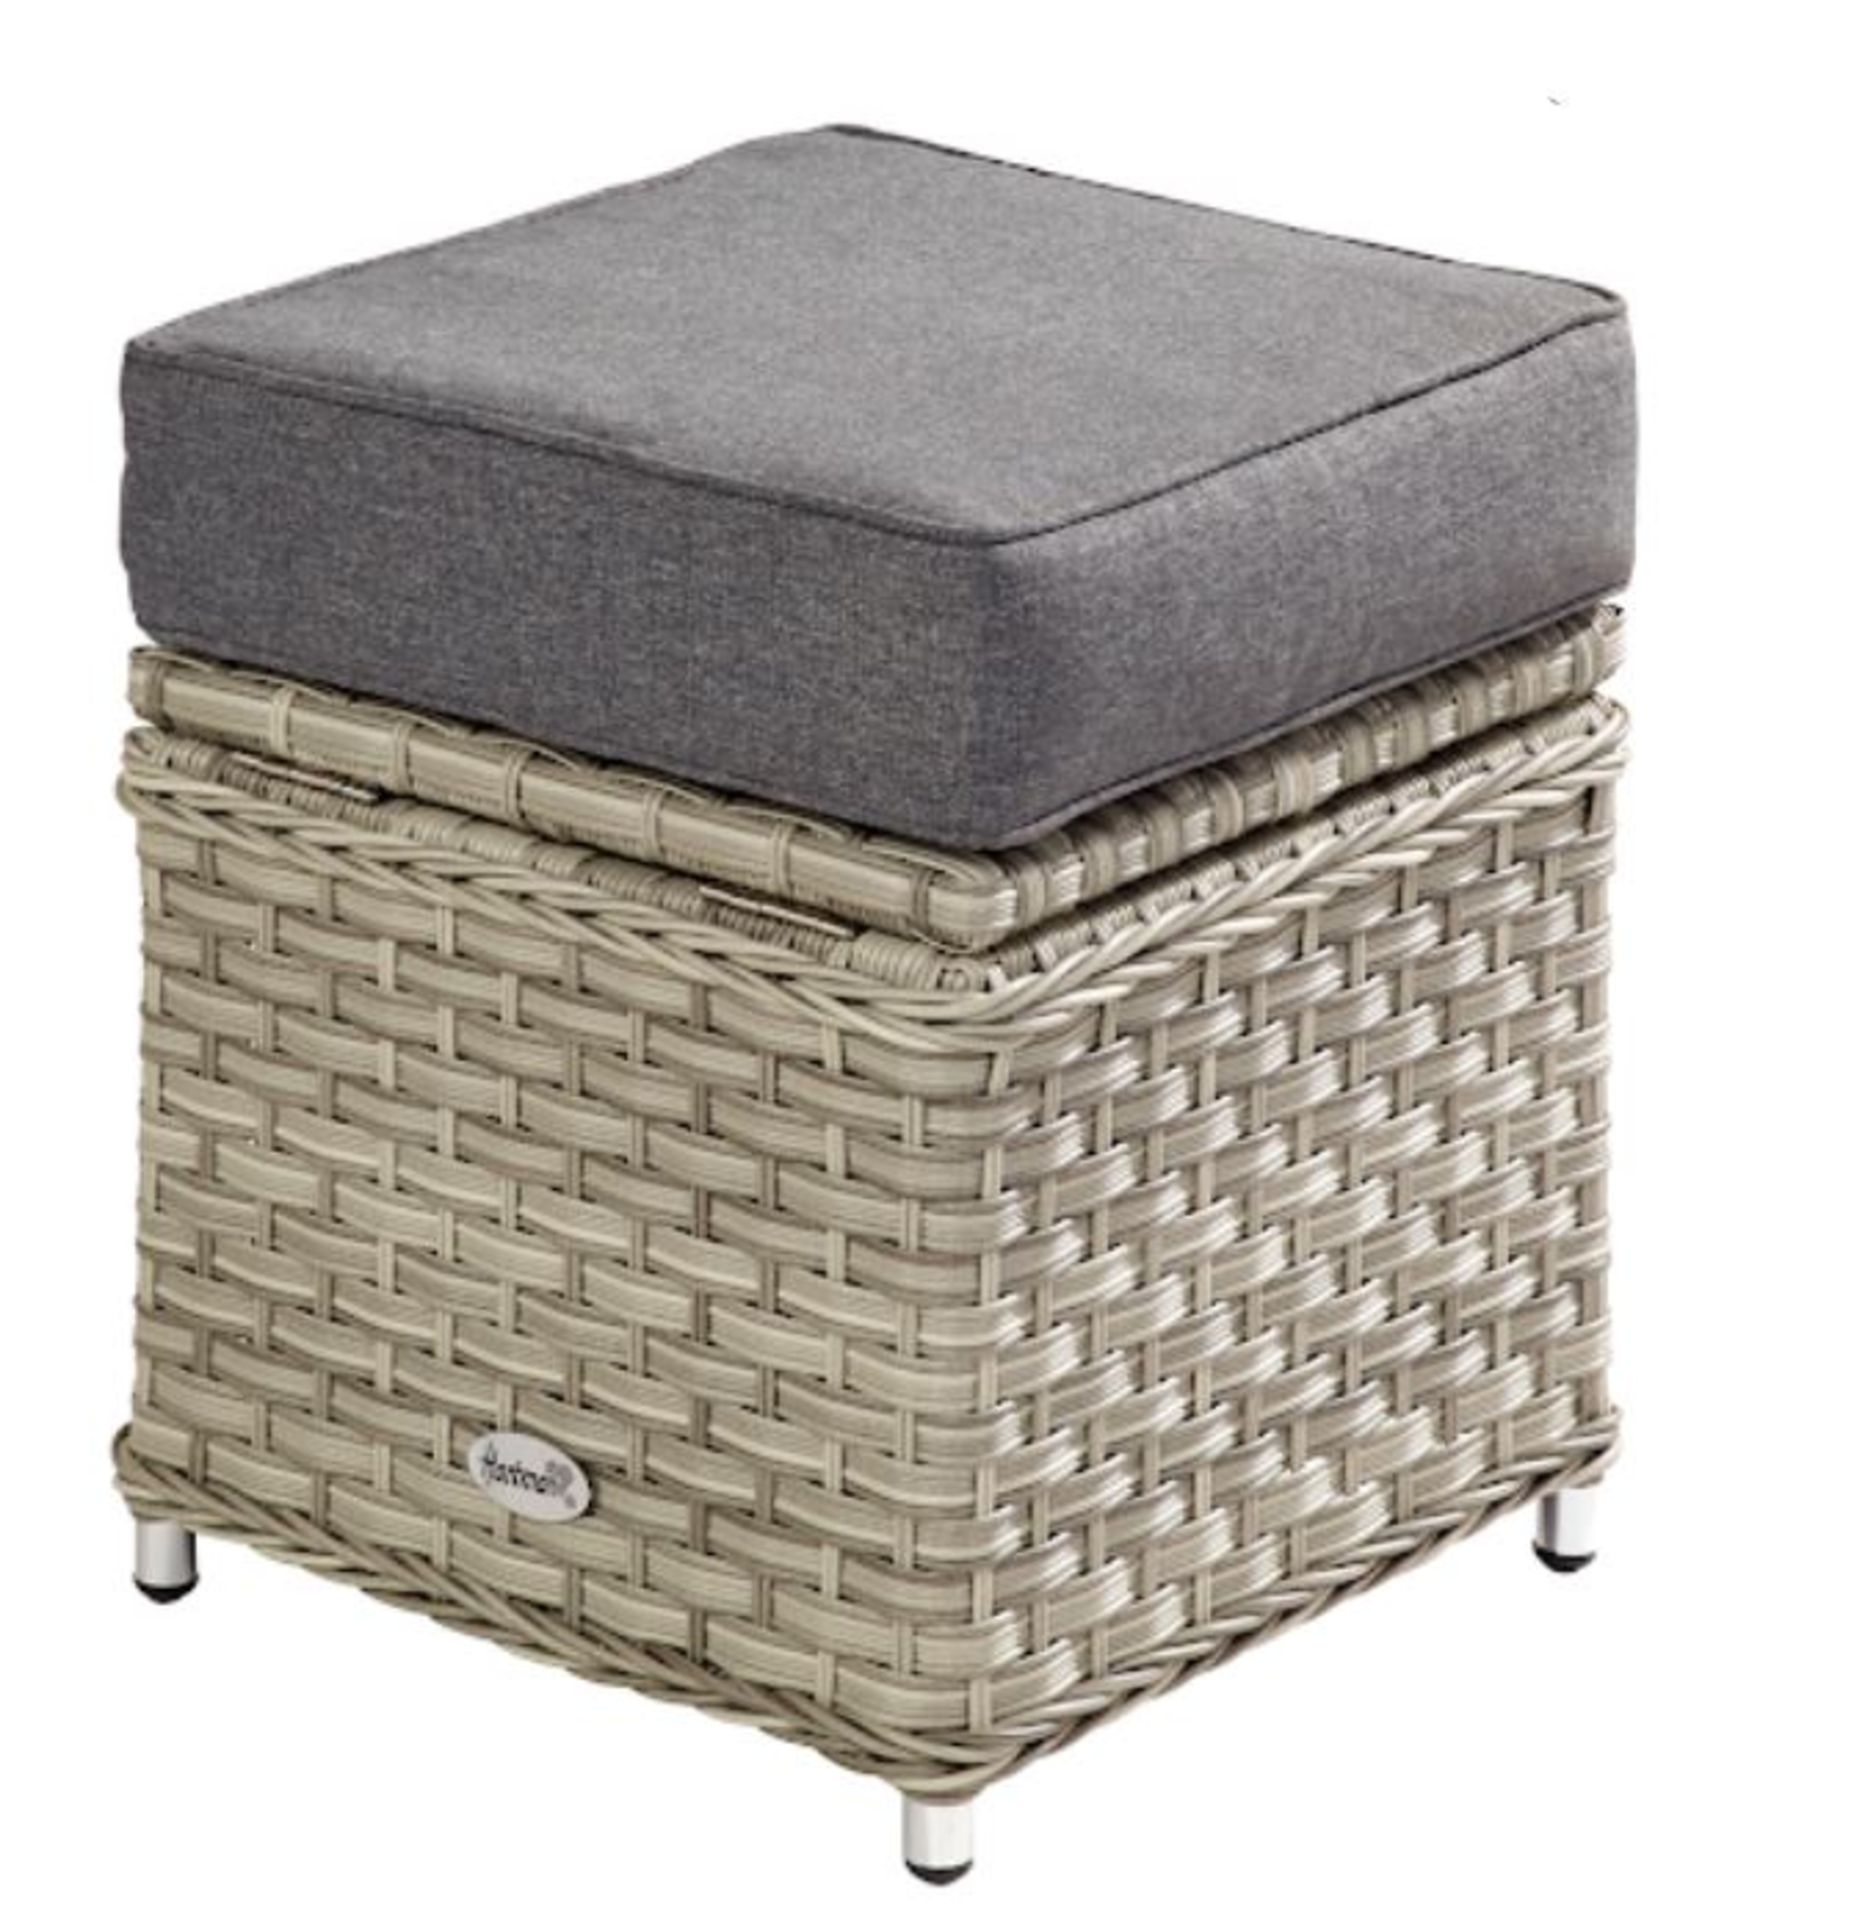 (R7J) 2x Hartman Rattan Stool With 2x Cushion. (Units Appear As New) - Image 2 of 3